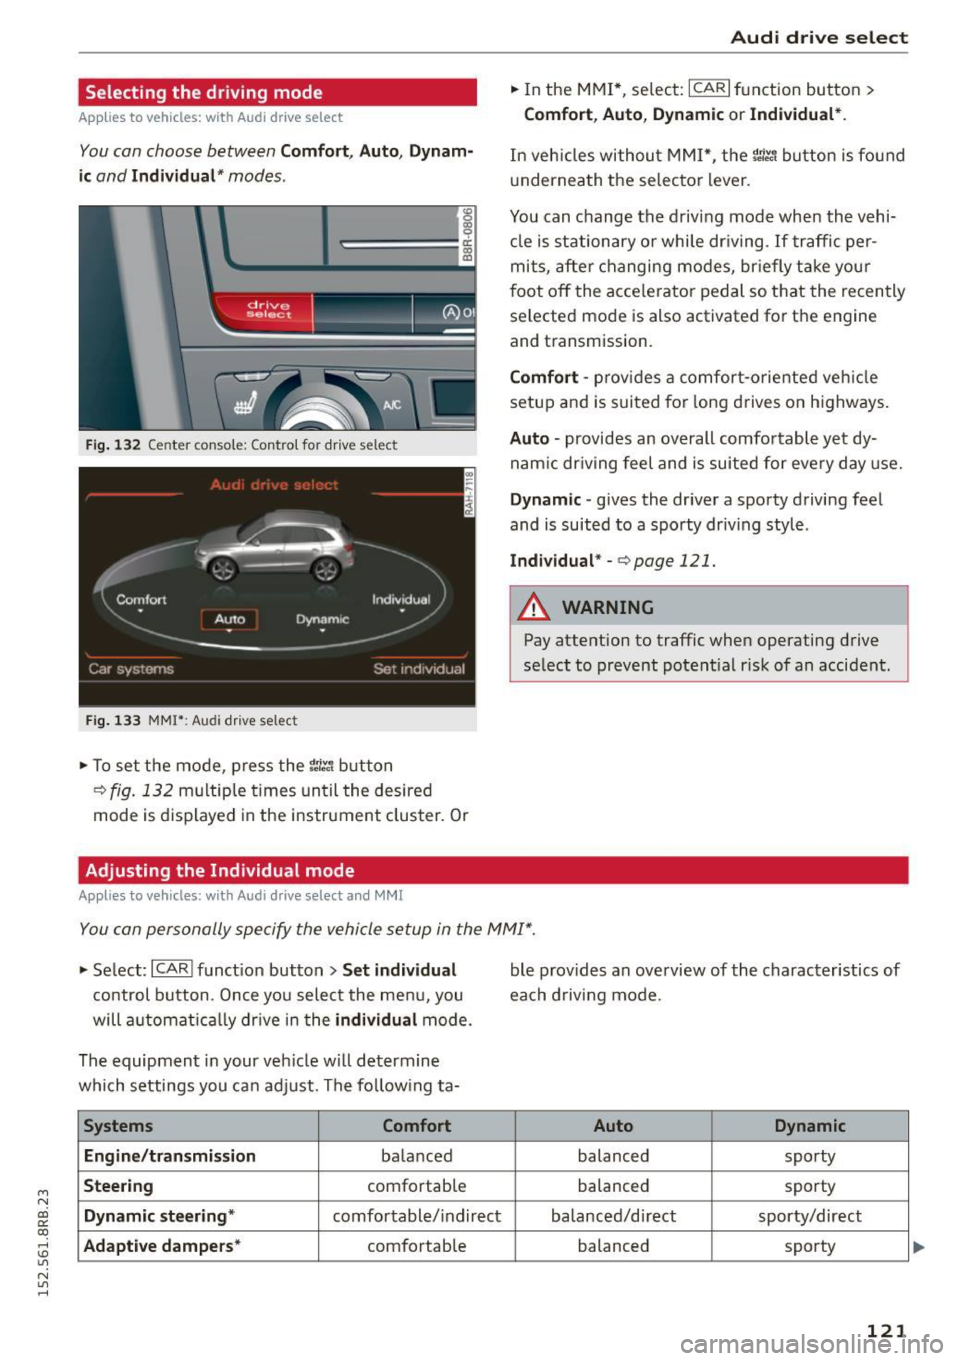 AUDI Q5 2015  Owners Manual M N 
co ~ co 
rl I.O 
" N 
" rl 
Selecting  the  driving  mode 
Applies  to  vehicles:  with  Audi drive  select 
You  con choose  between Comfort,  Auto,  Dynam­
ic 
and Individual* modes . 
«> 
